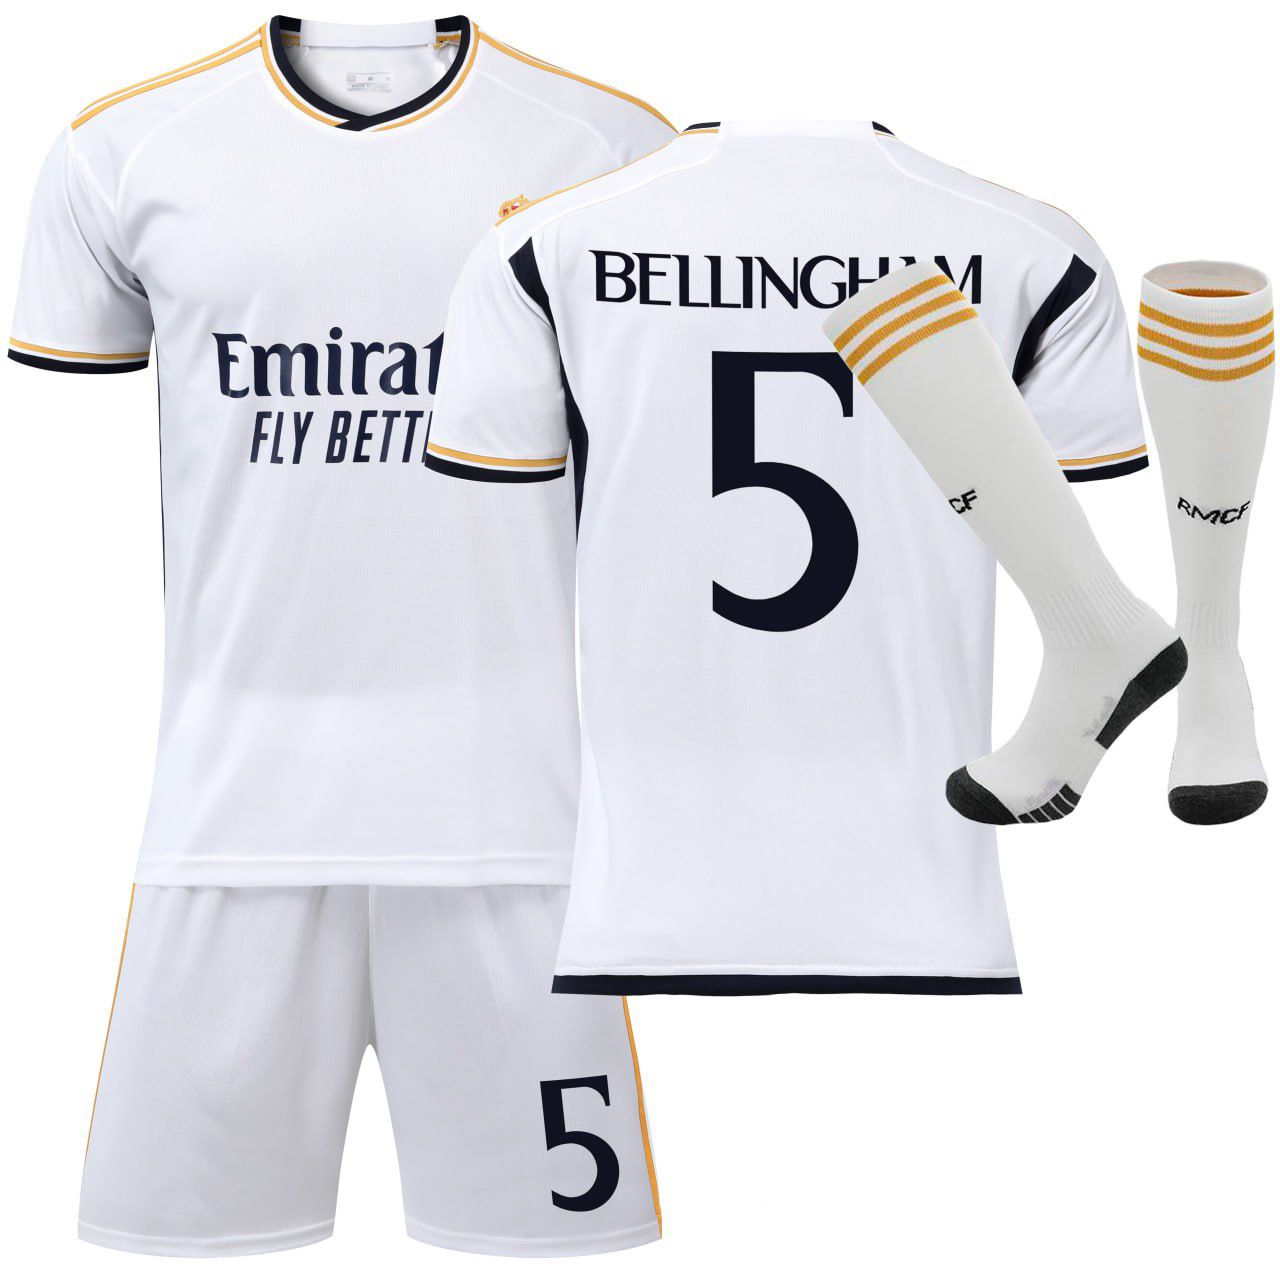 Real Madrid Bellingham No. 5 Fan Soccer Jersey Set with Socks Youth Sizes (7-13 years)